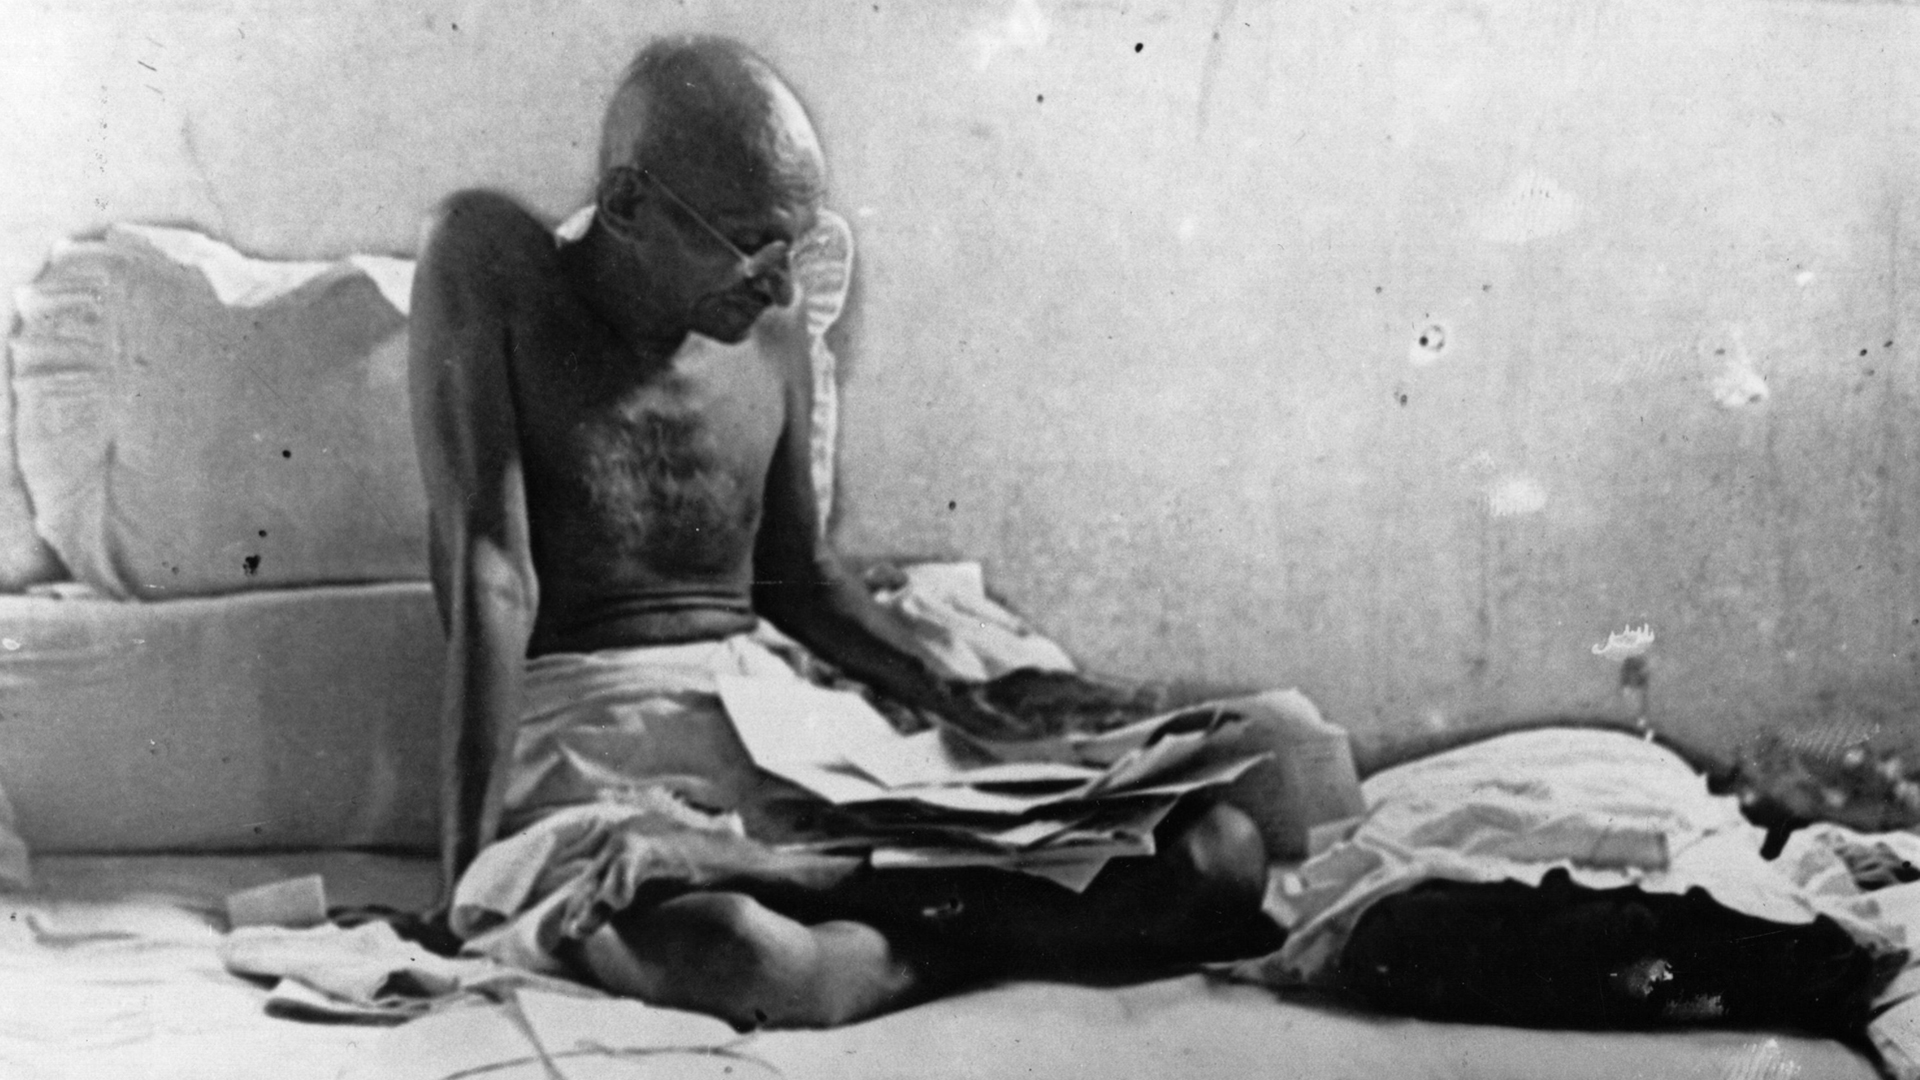 Gandhi carrying out a hunger strike